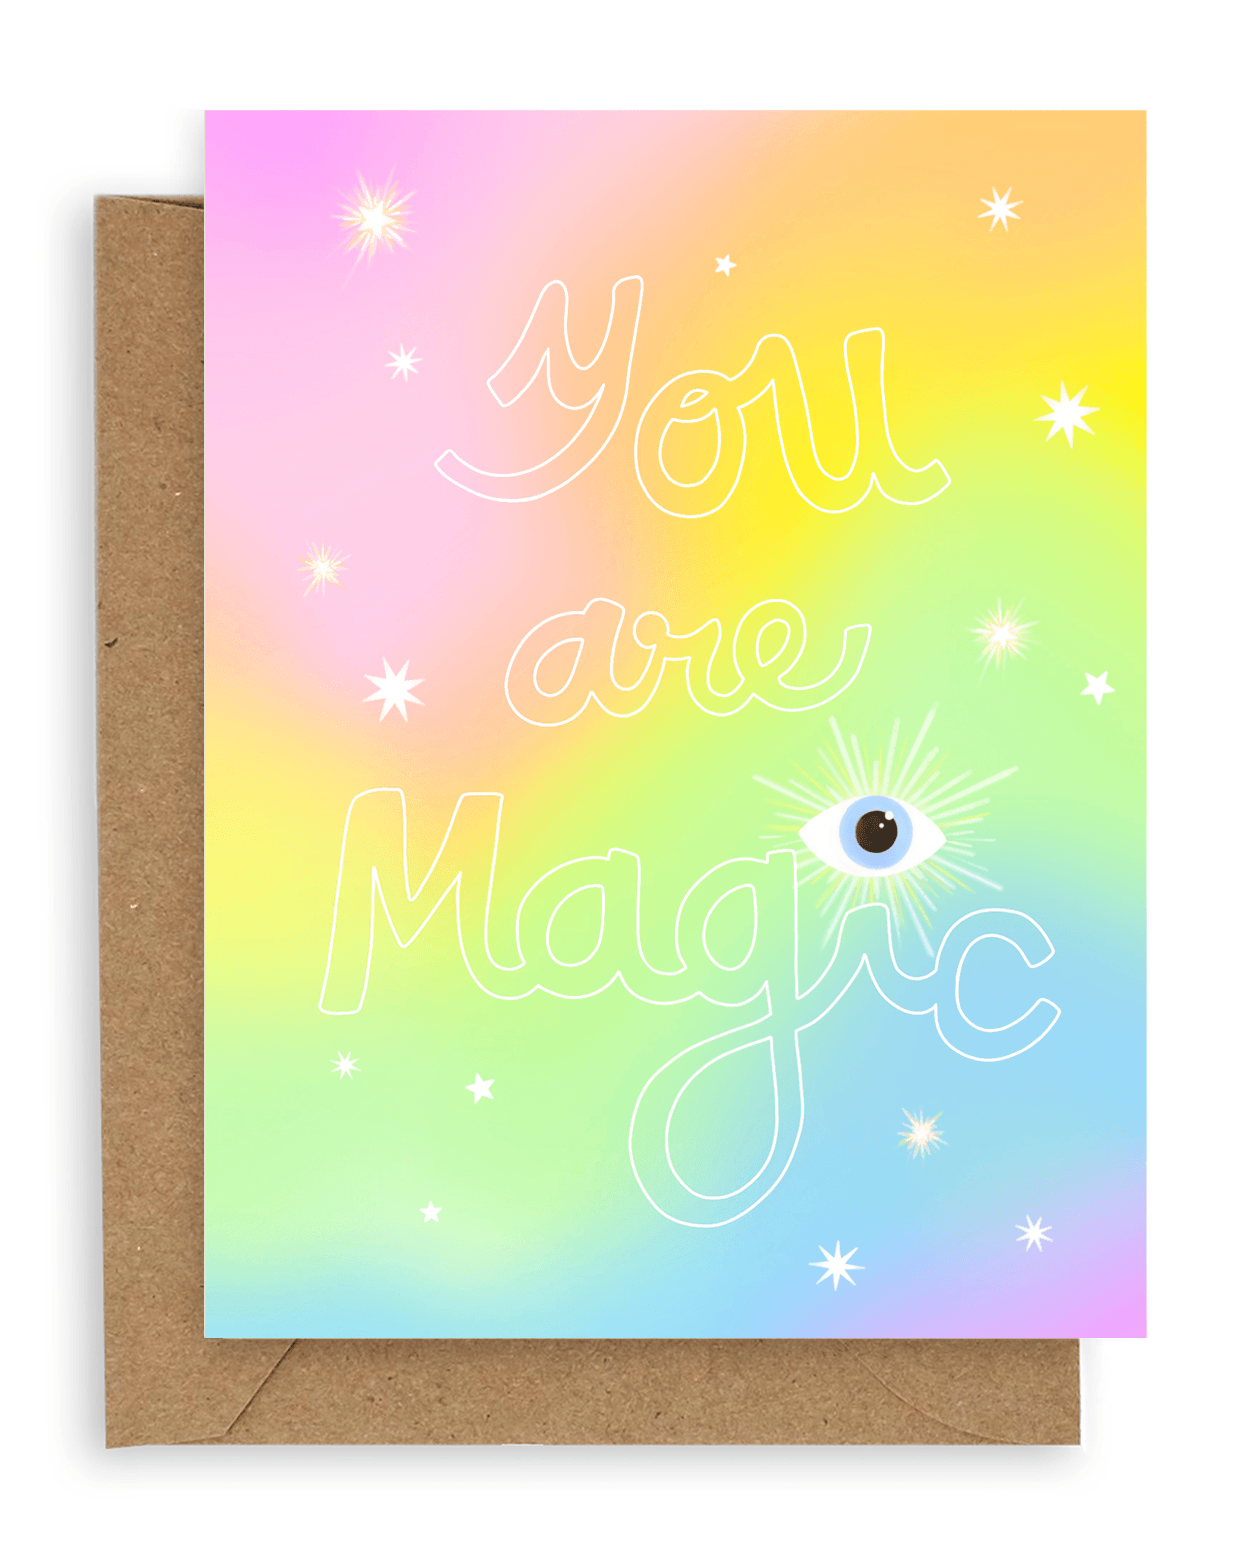 The words "You are magic" in hollow white font with stars and a neon icon eye above the "i" in magic, printed on a gradient pink, yellow, blue, green and purple background. Shown with kraft envelope.